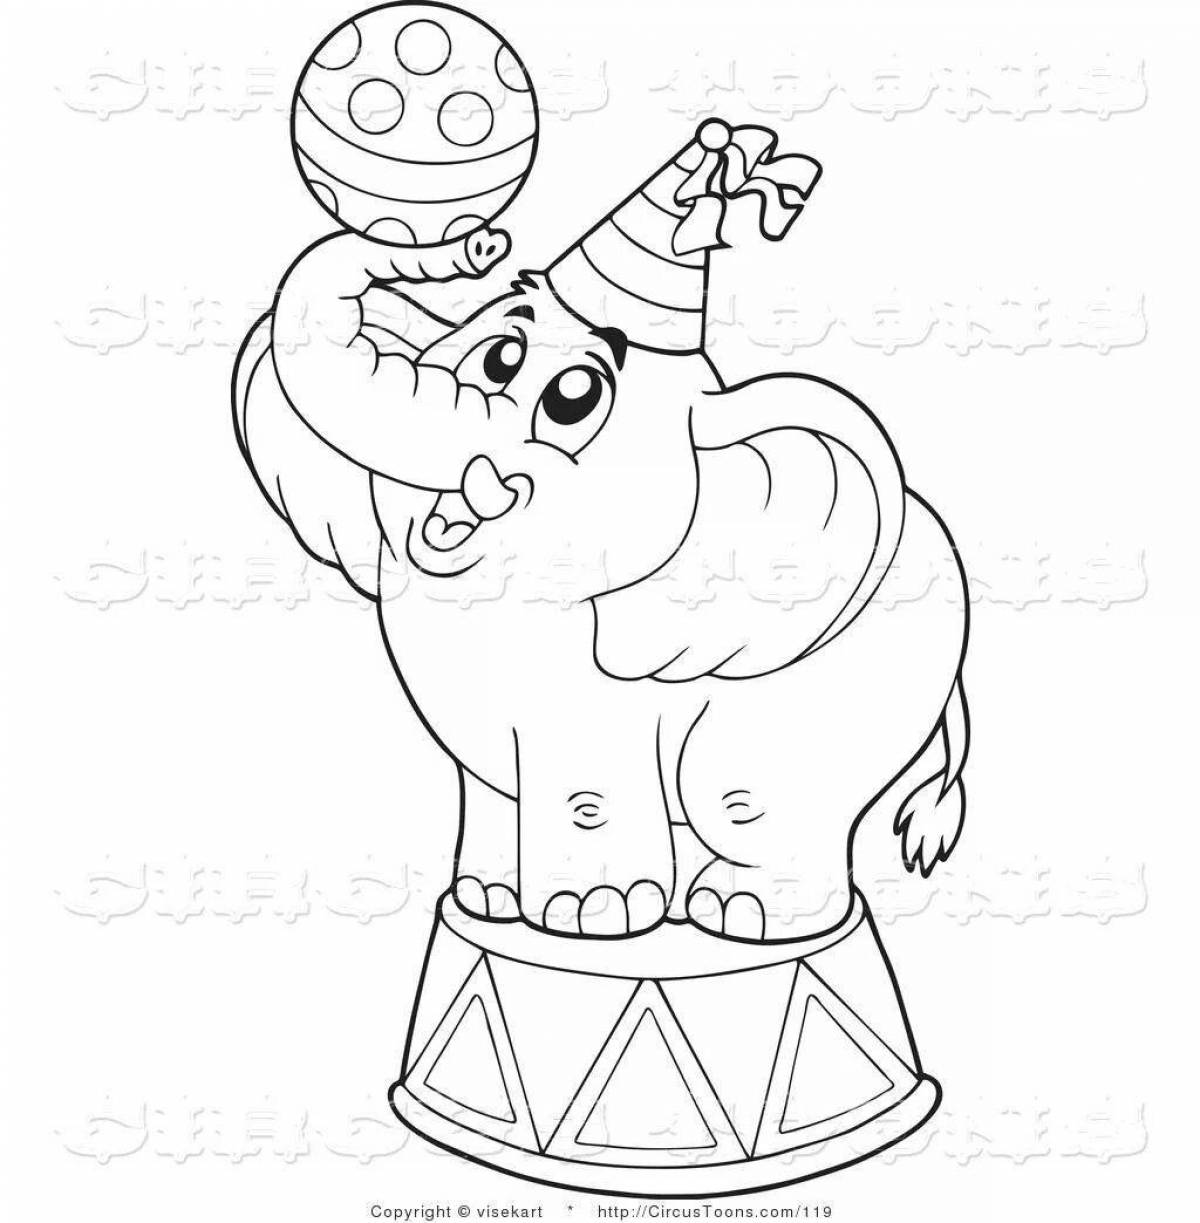 Coloring page nice circus arena